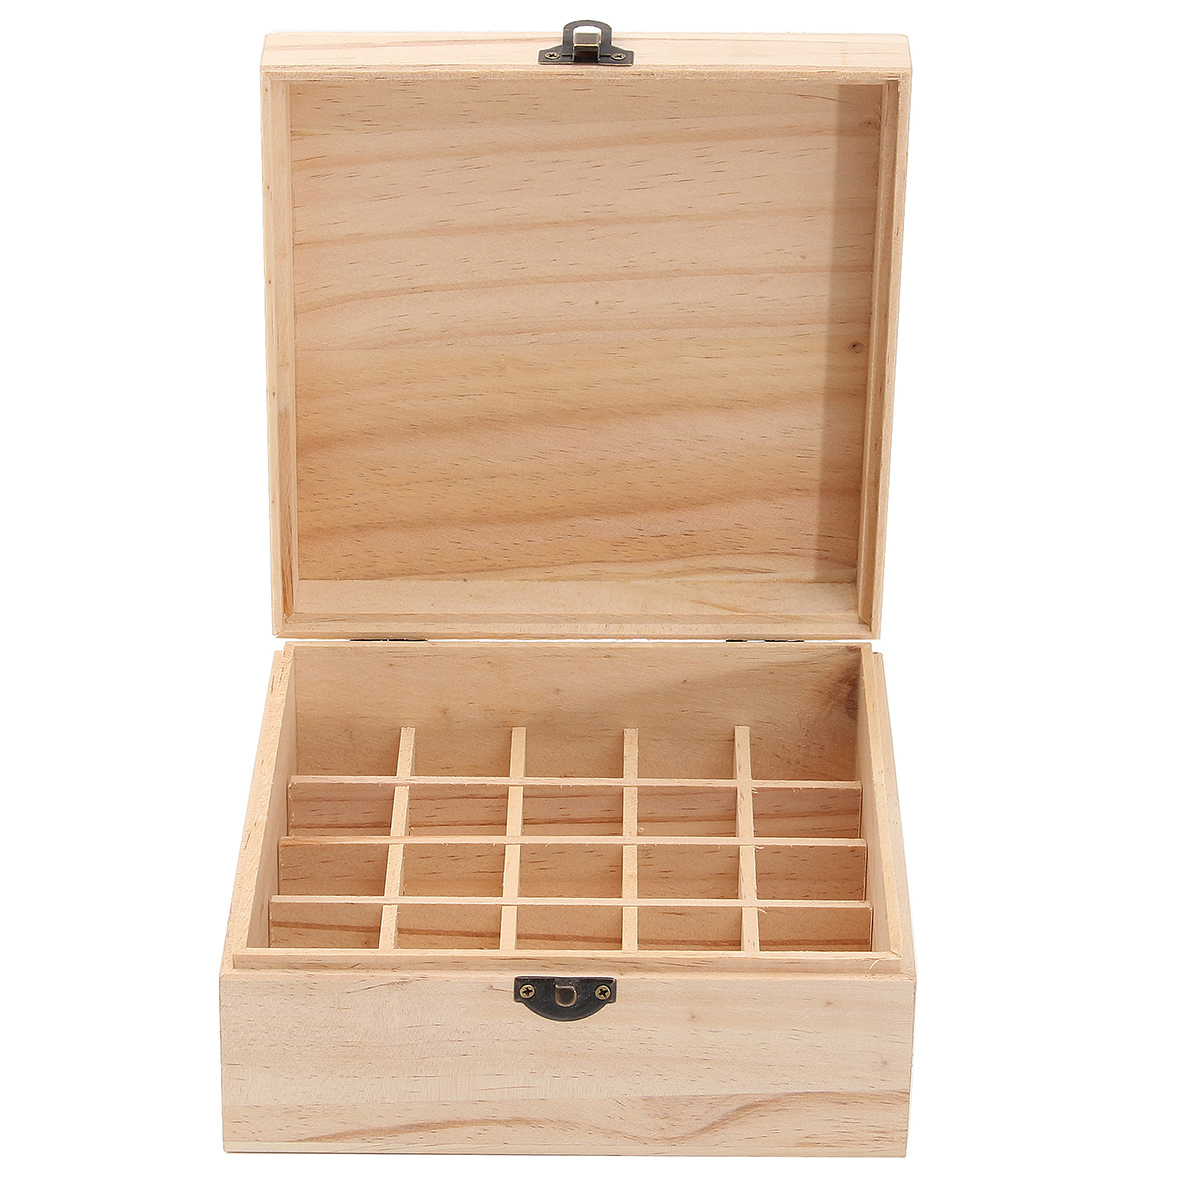 

25 Grids Wooden Box Bottles Container Storage for Essential Oil Jewelry